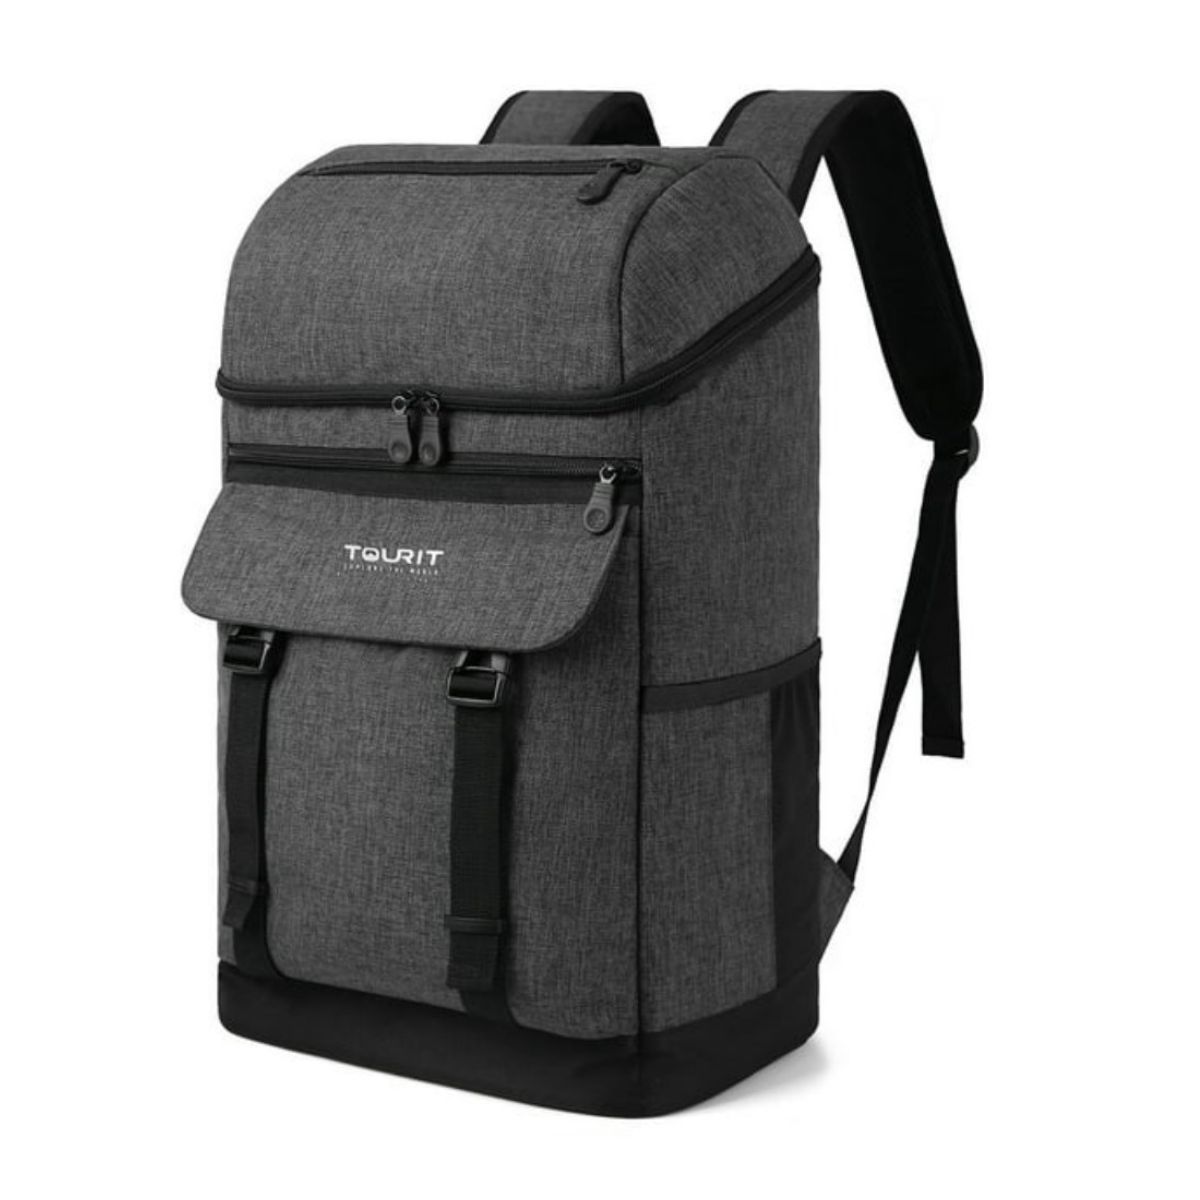 Grey backpack lunch box with black trim.